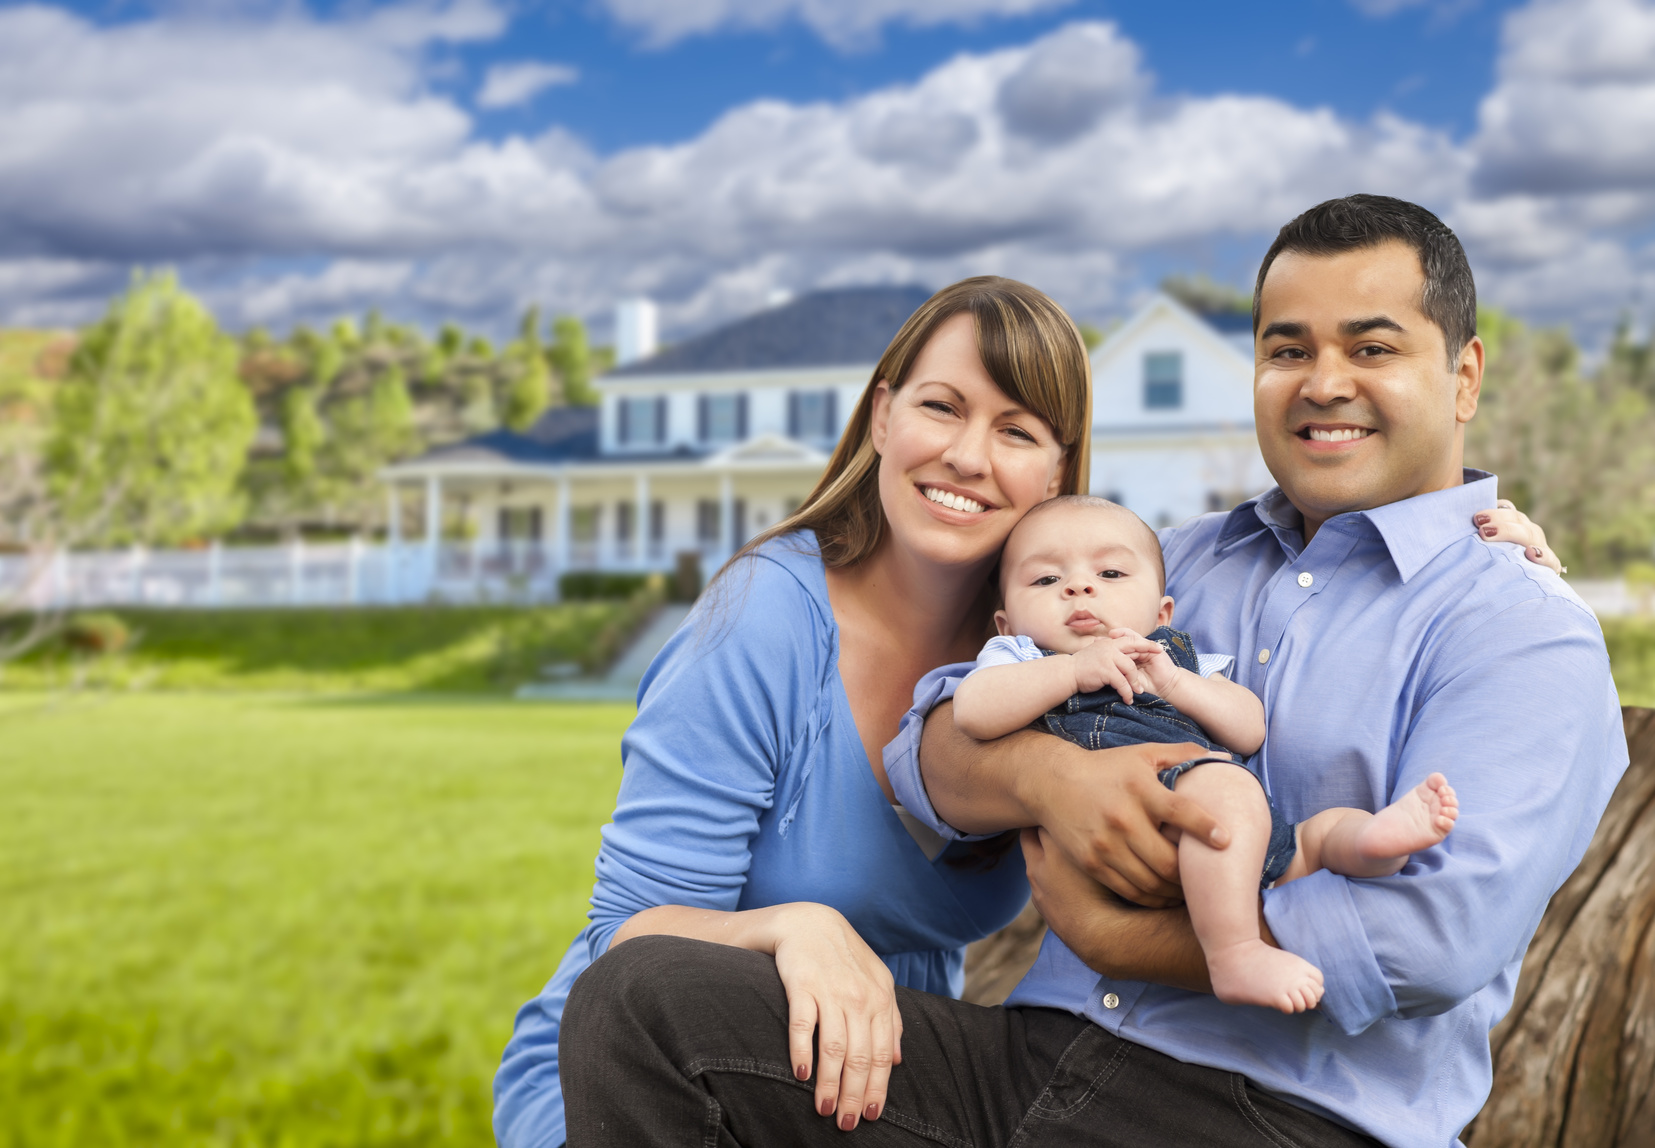 Home equity line of credit options